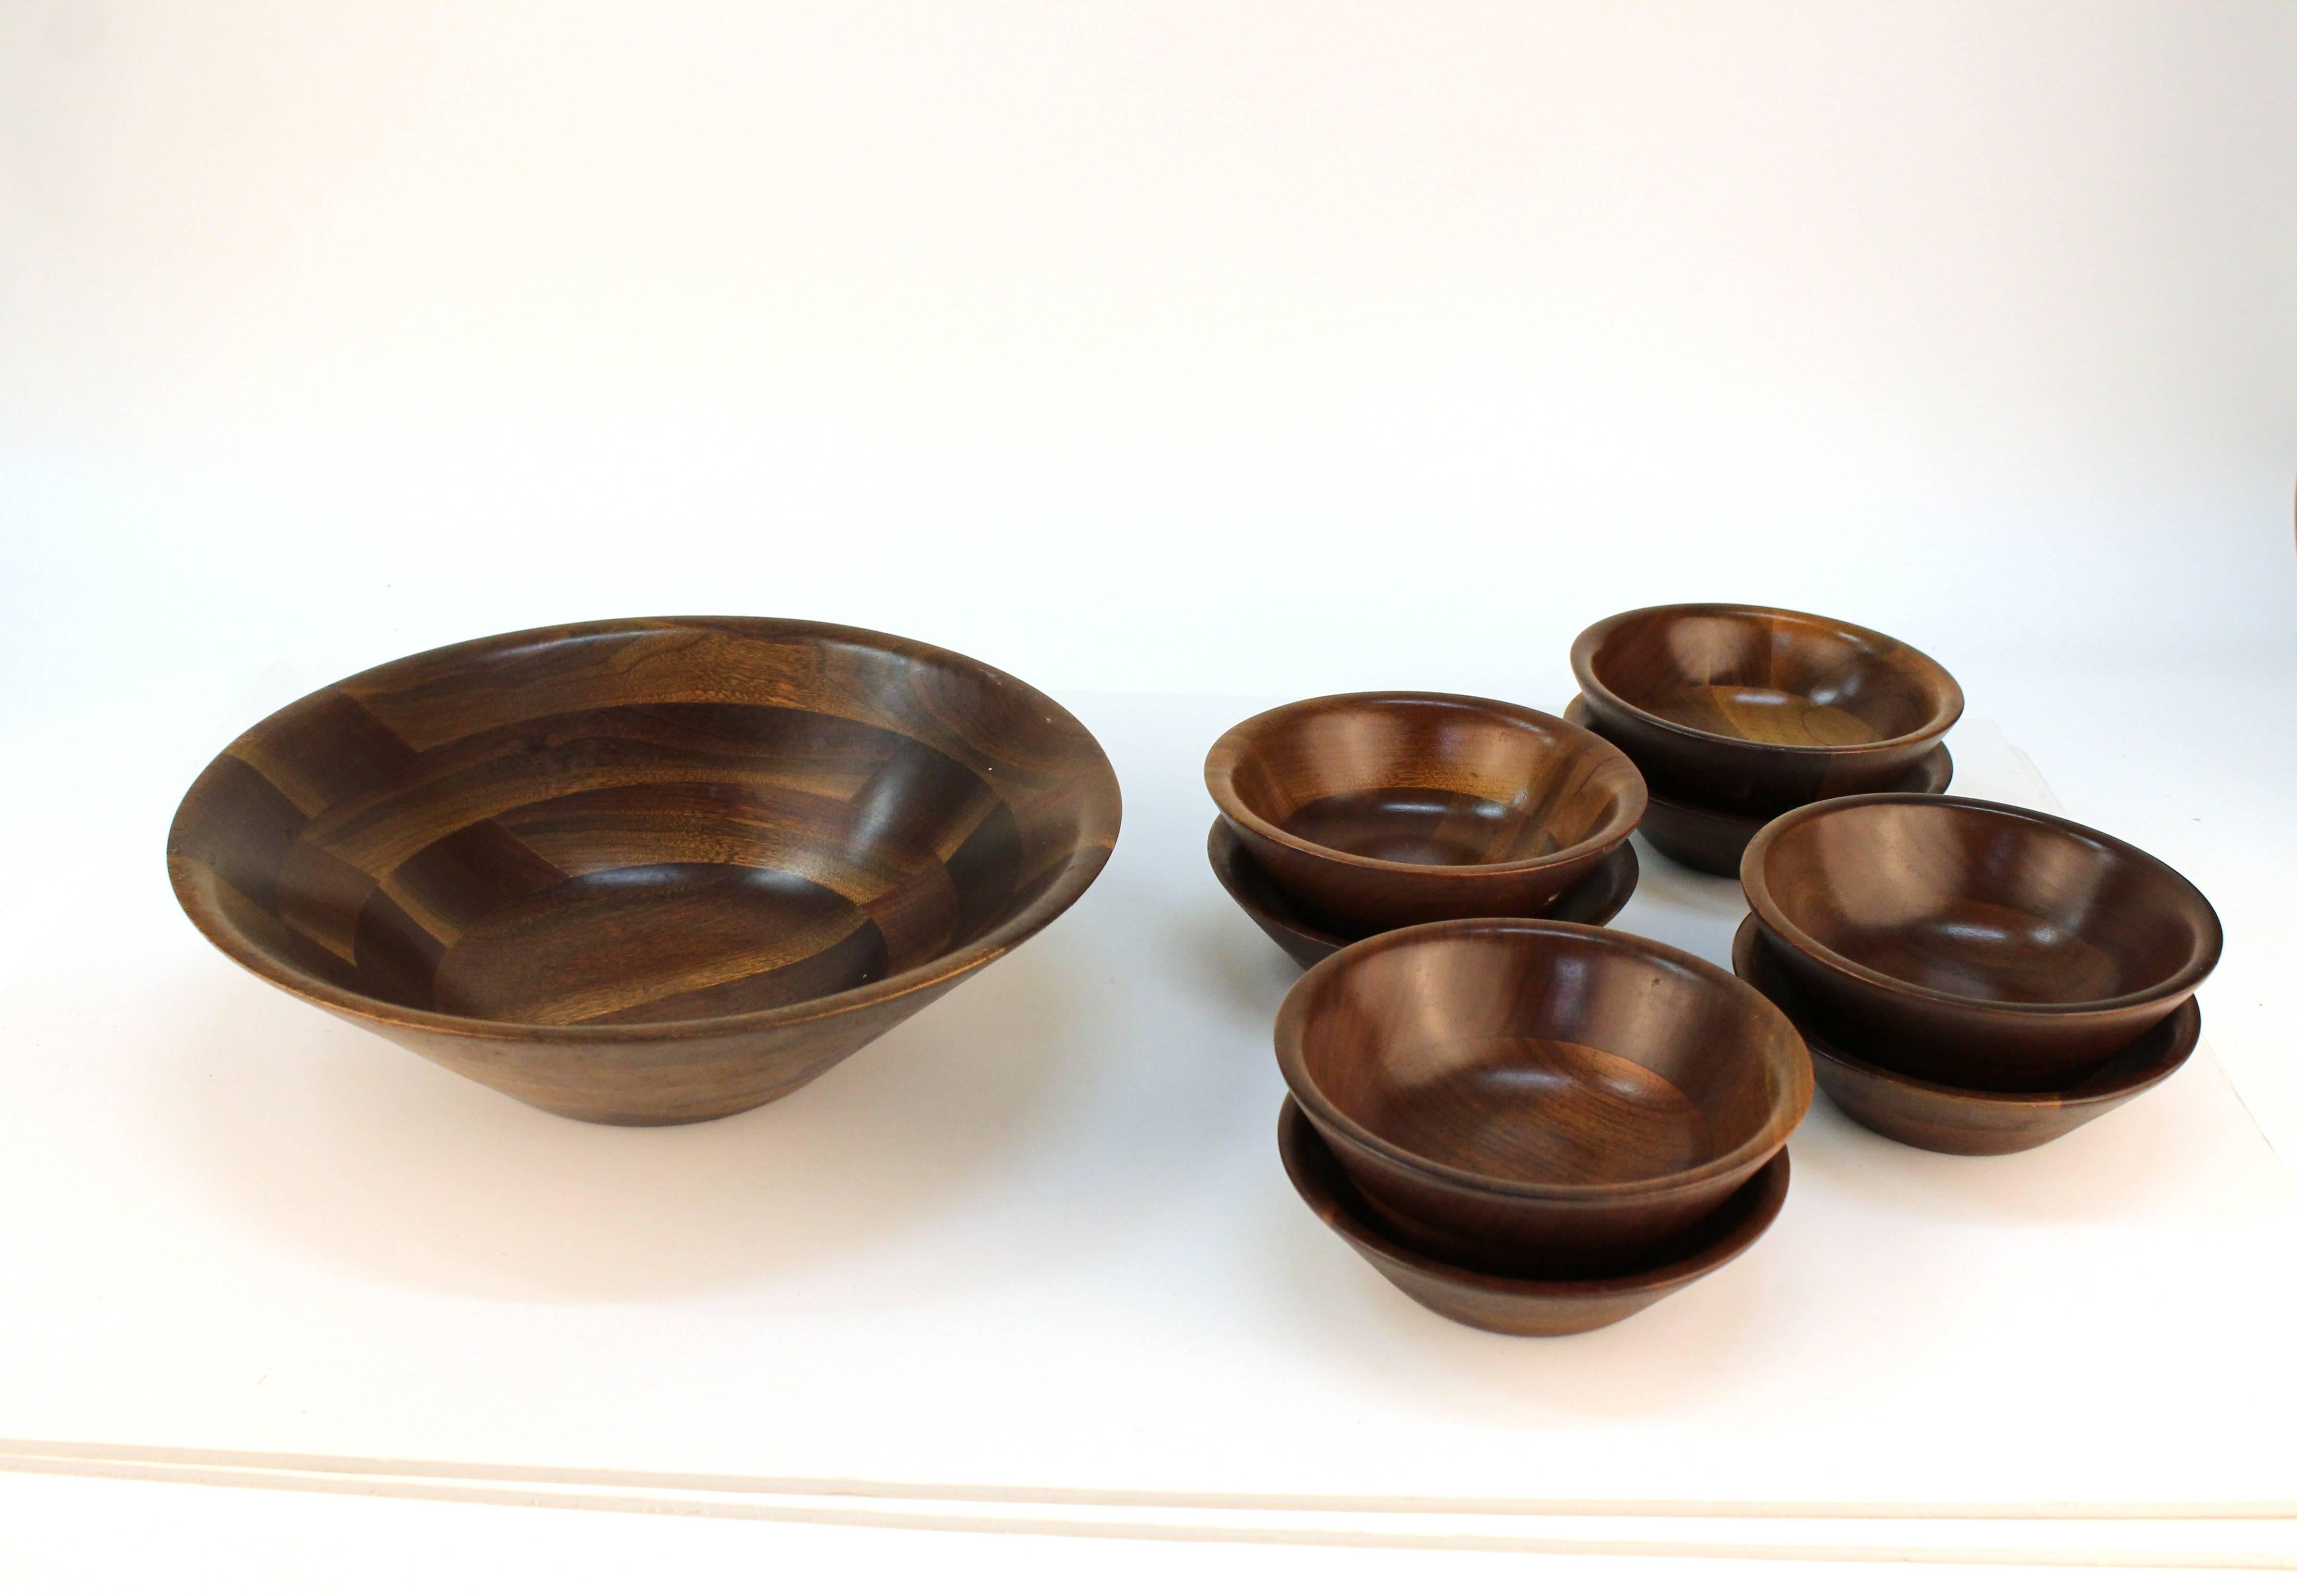 A set of Vermilion walnut bowls. Includes one large salad bowl and eight serving plates. Despite some minor wear, the set remains in over all good condition. 

Measures: Large bowl dimensions: 3